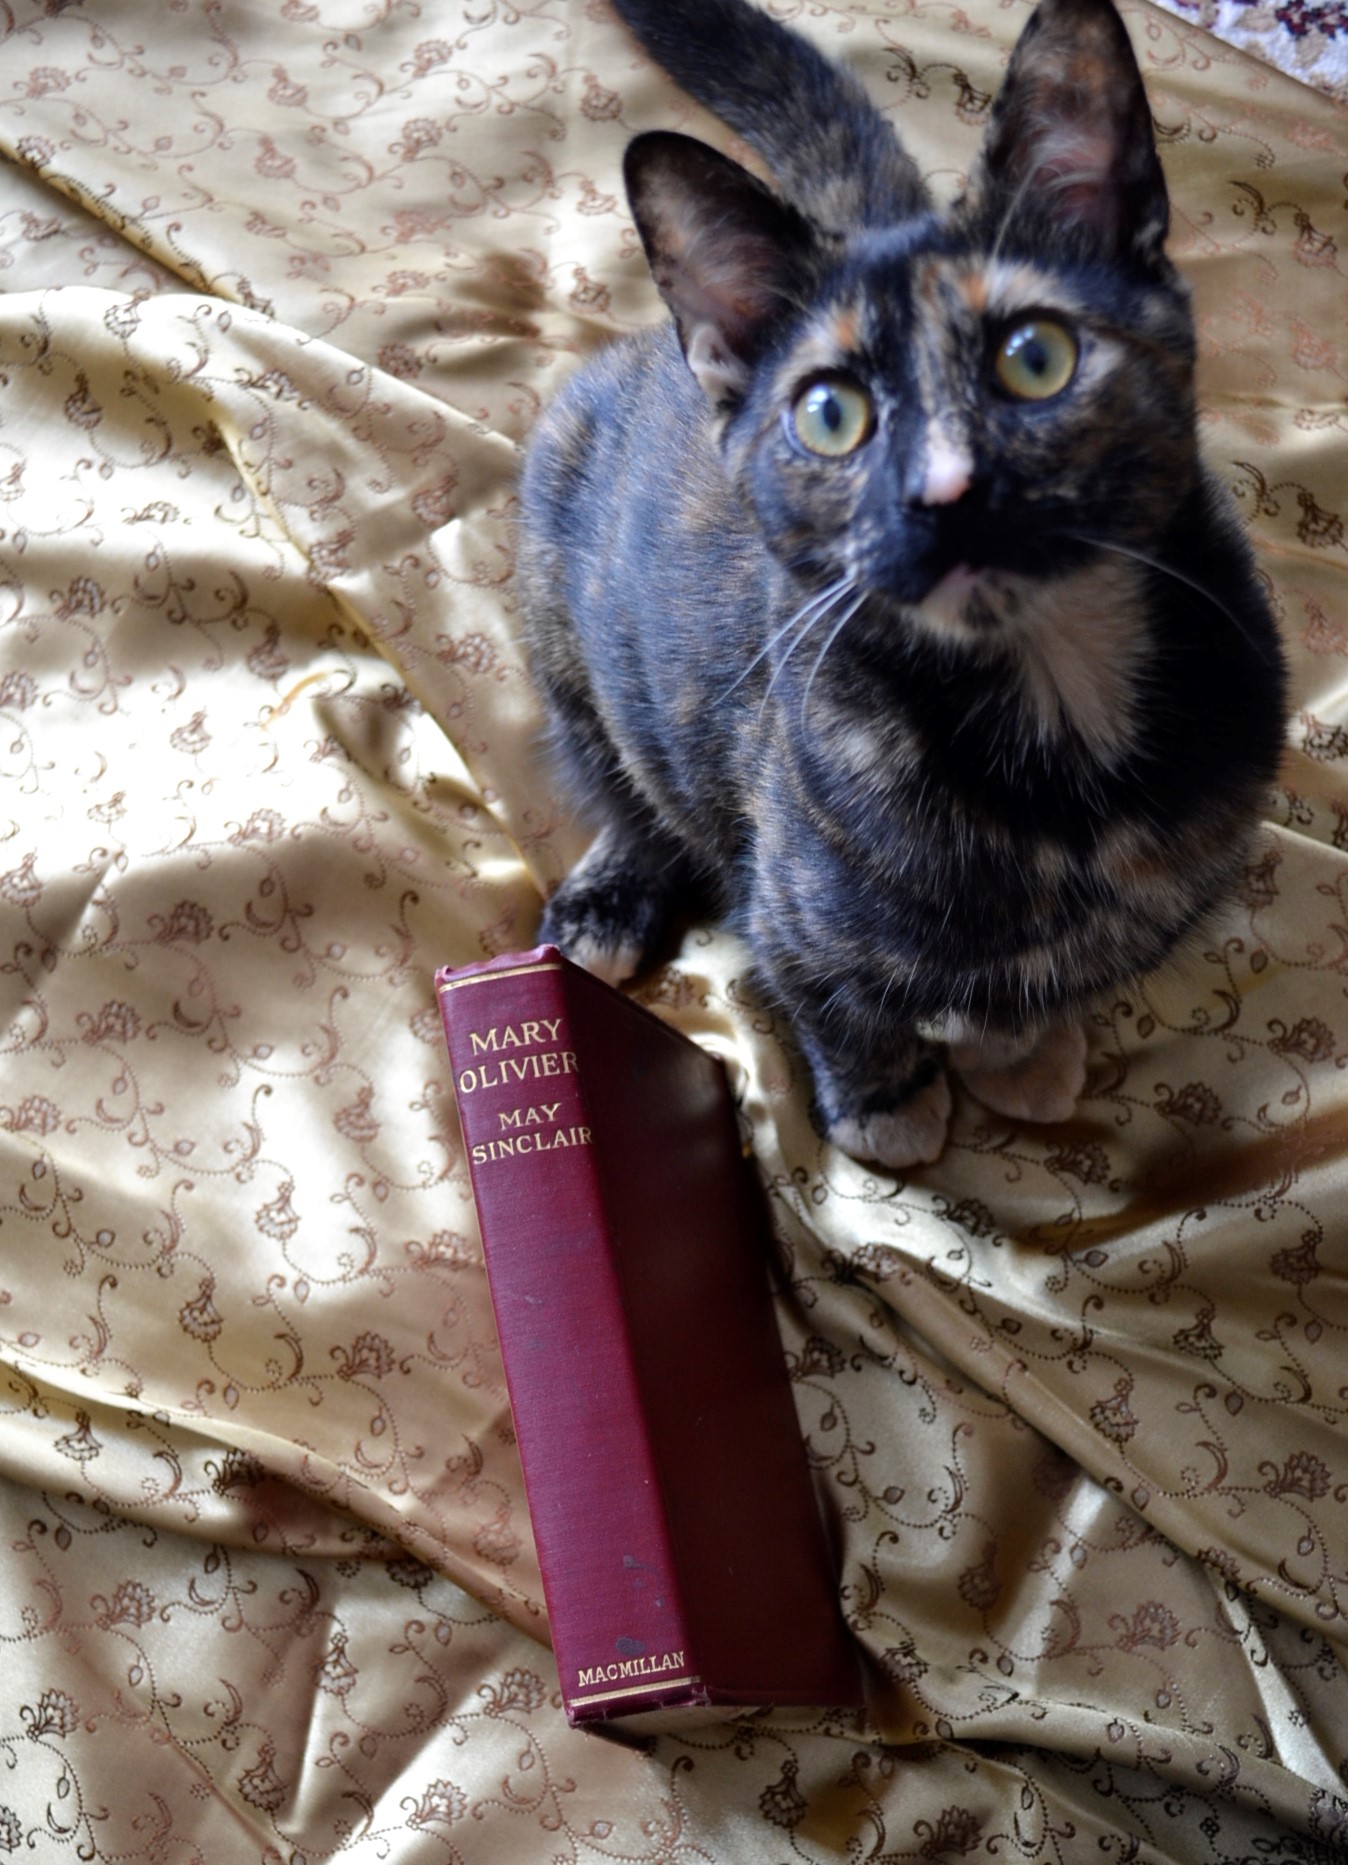 A tortoiseshell kitten sits beside a red 1919 edition of Mary Olivier.